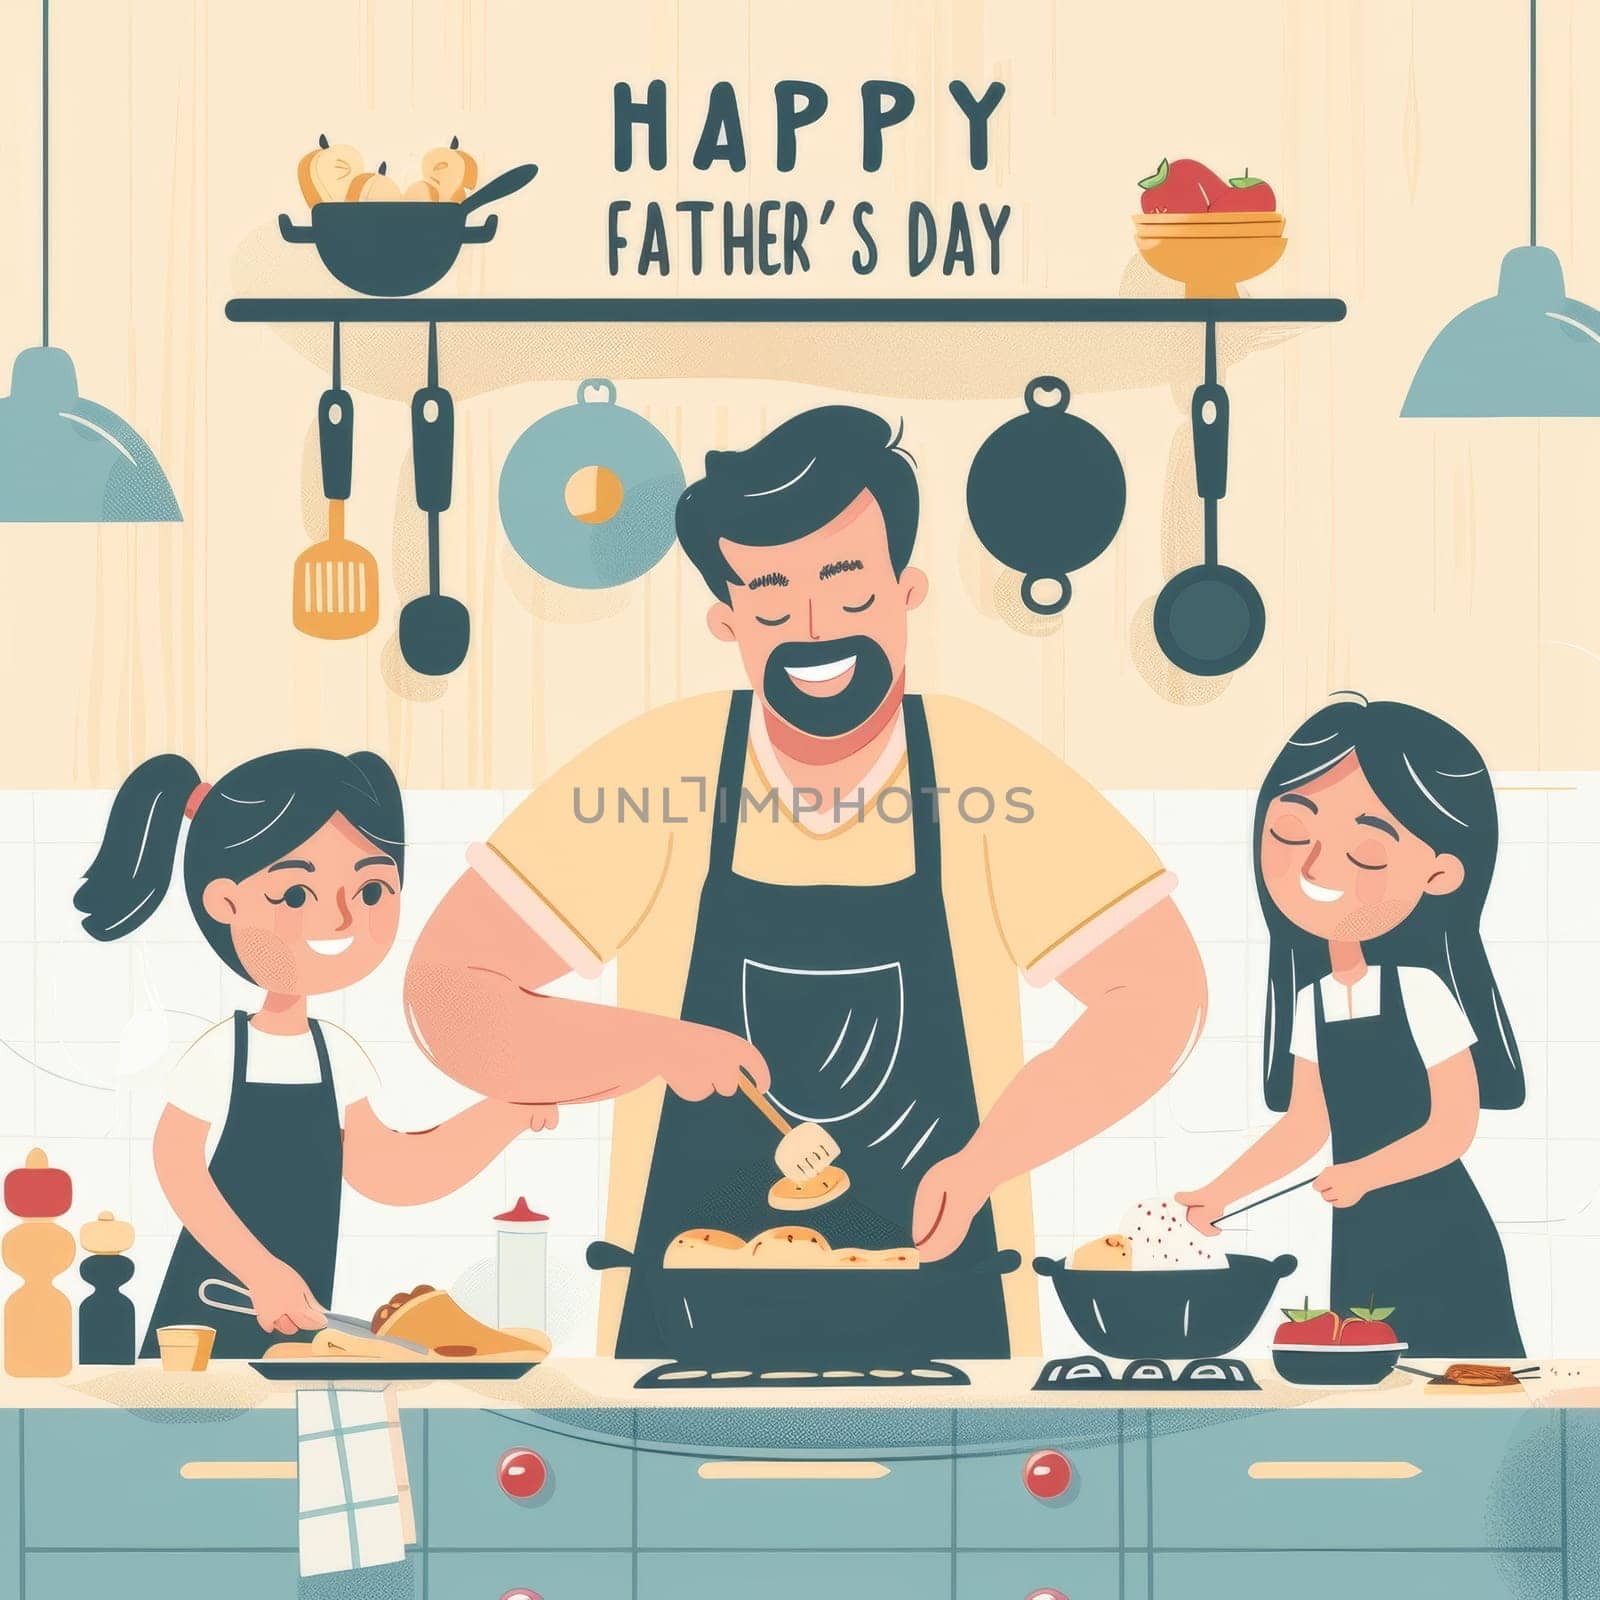 A cheerful cartoon of a dad and his children happily engaging in baking activities in a bright kitchen for Fathers Day